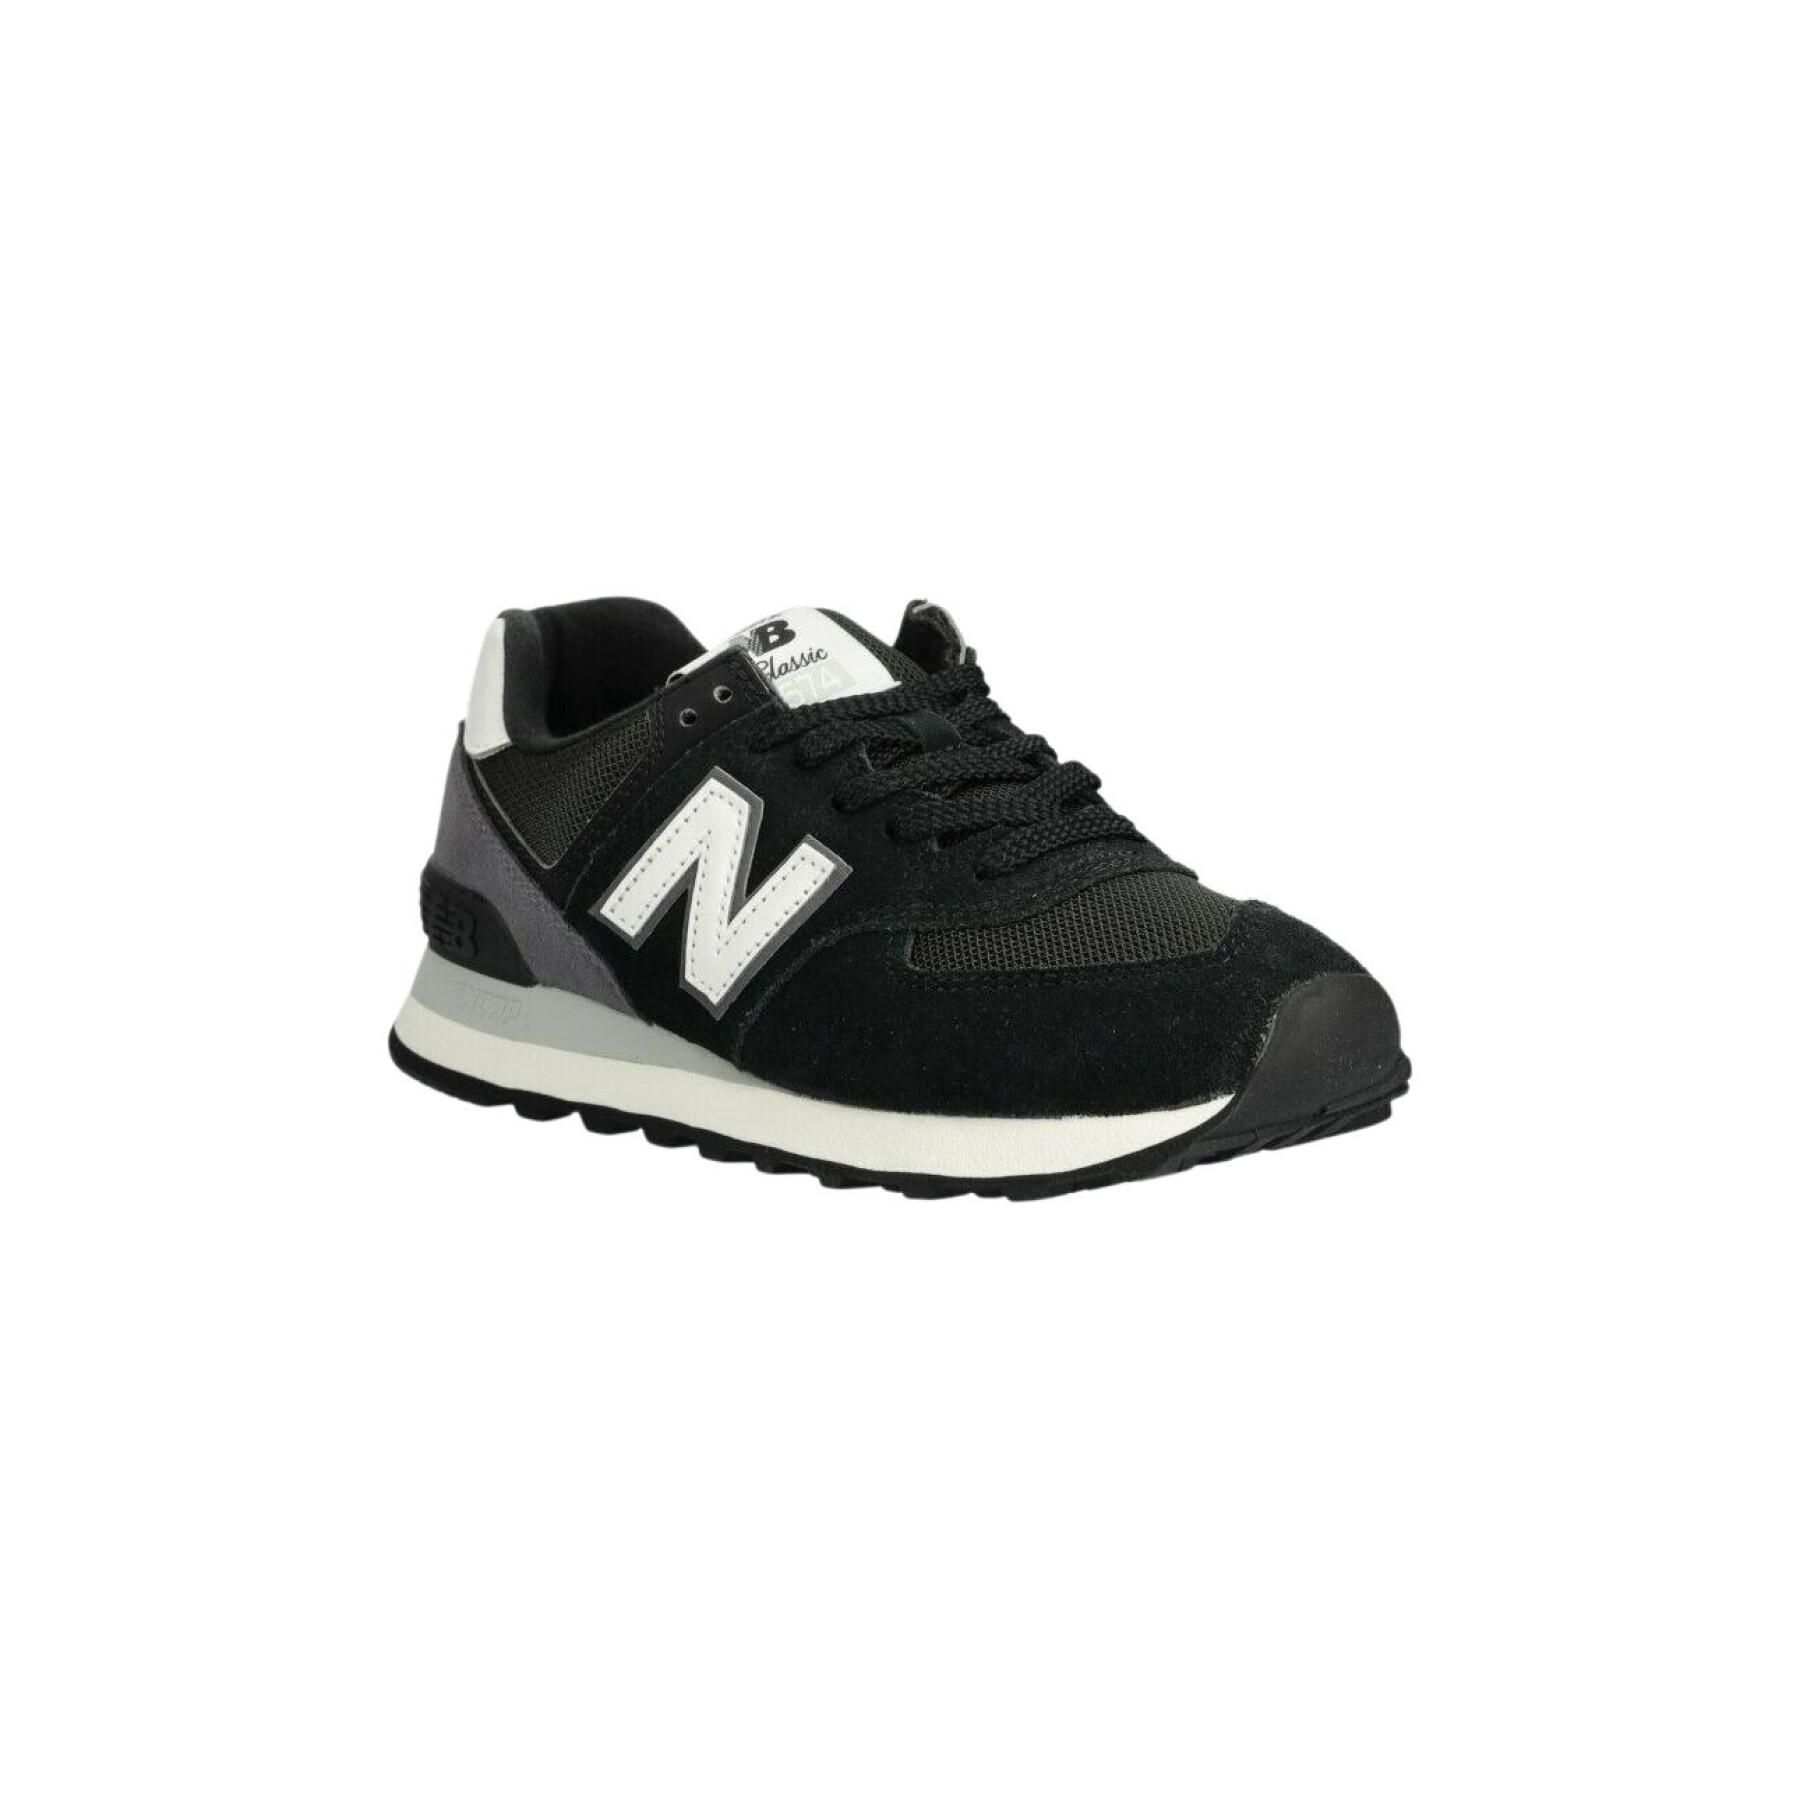 Sneakers New Balance 574V2